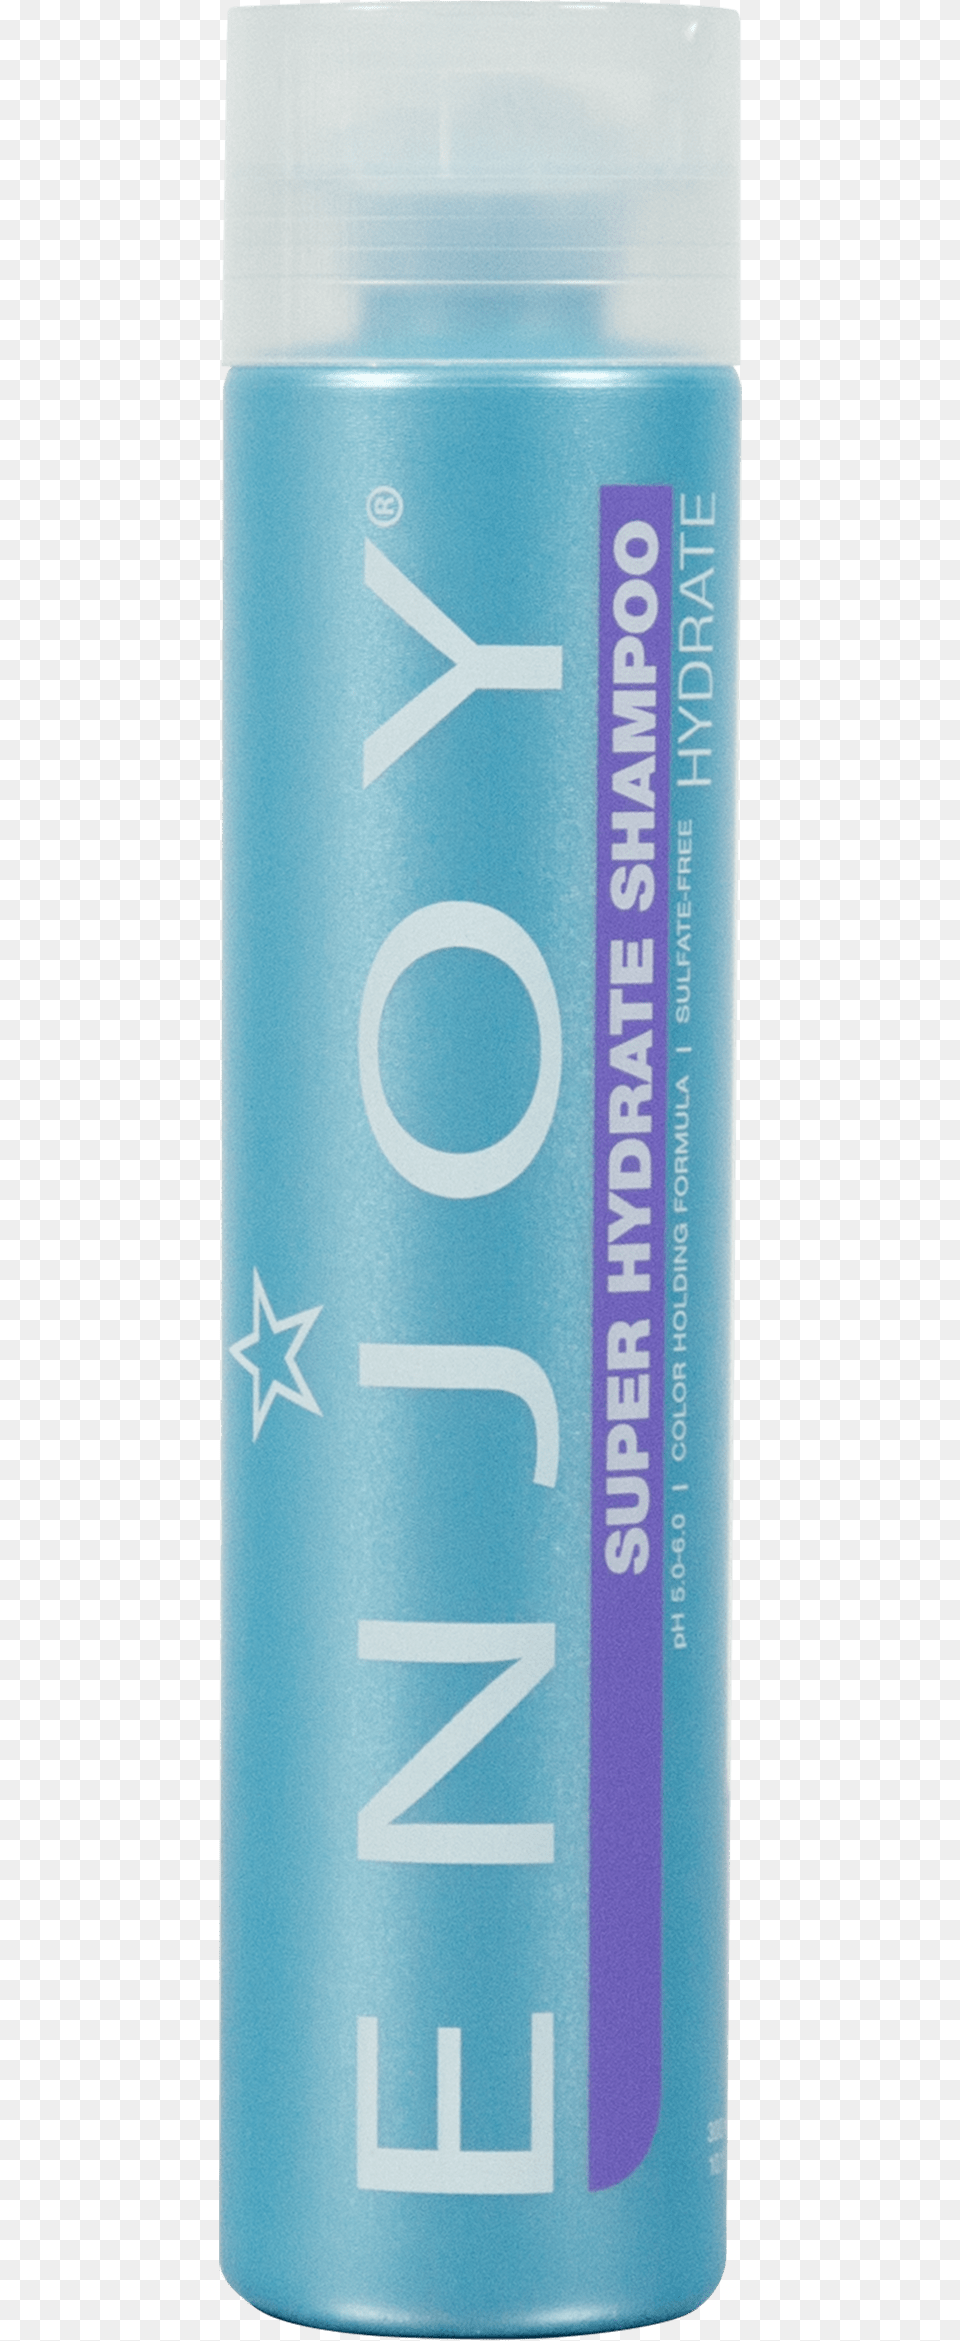 Super Hydrate Shampoo Cosmetics, Can, Tin, Bottle Png Image